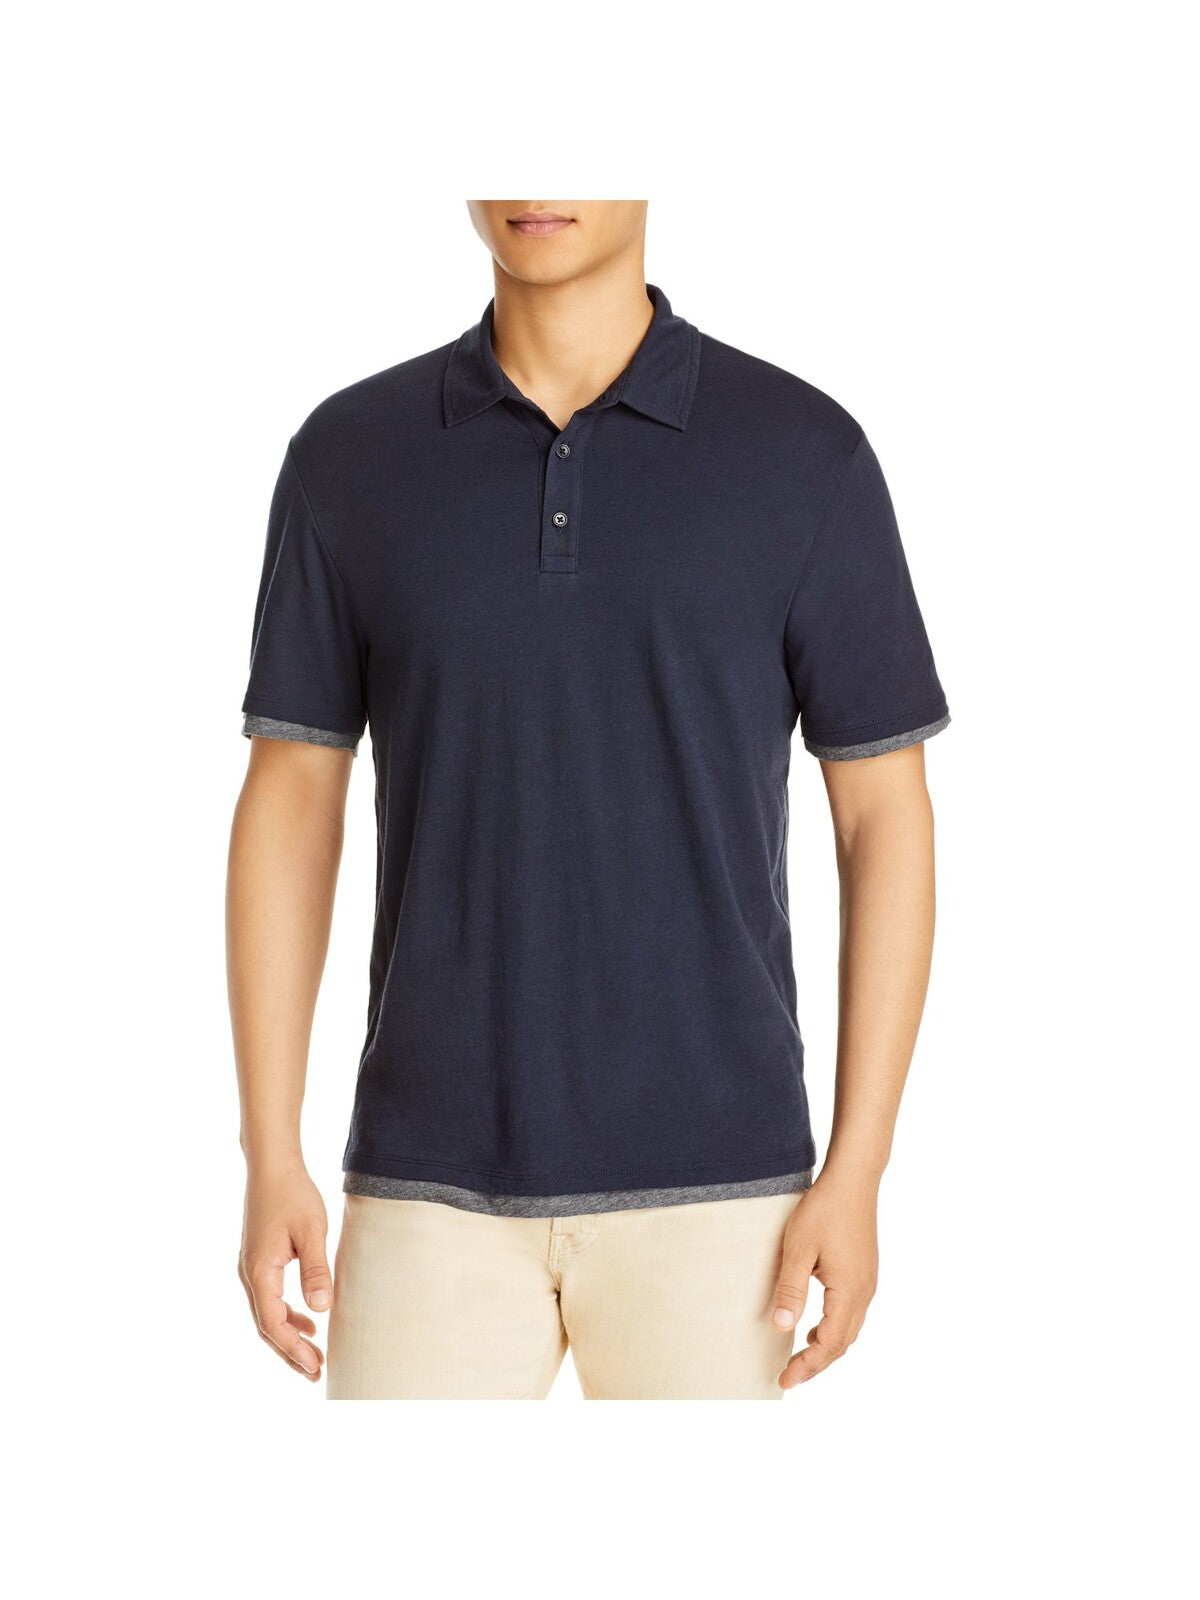 VINCE. Mens Navy Short Sleeve Slim Fit Polo M